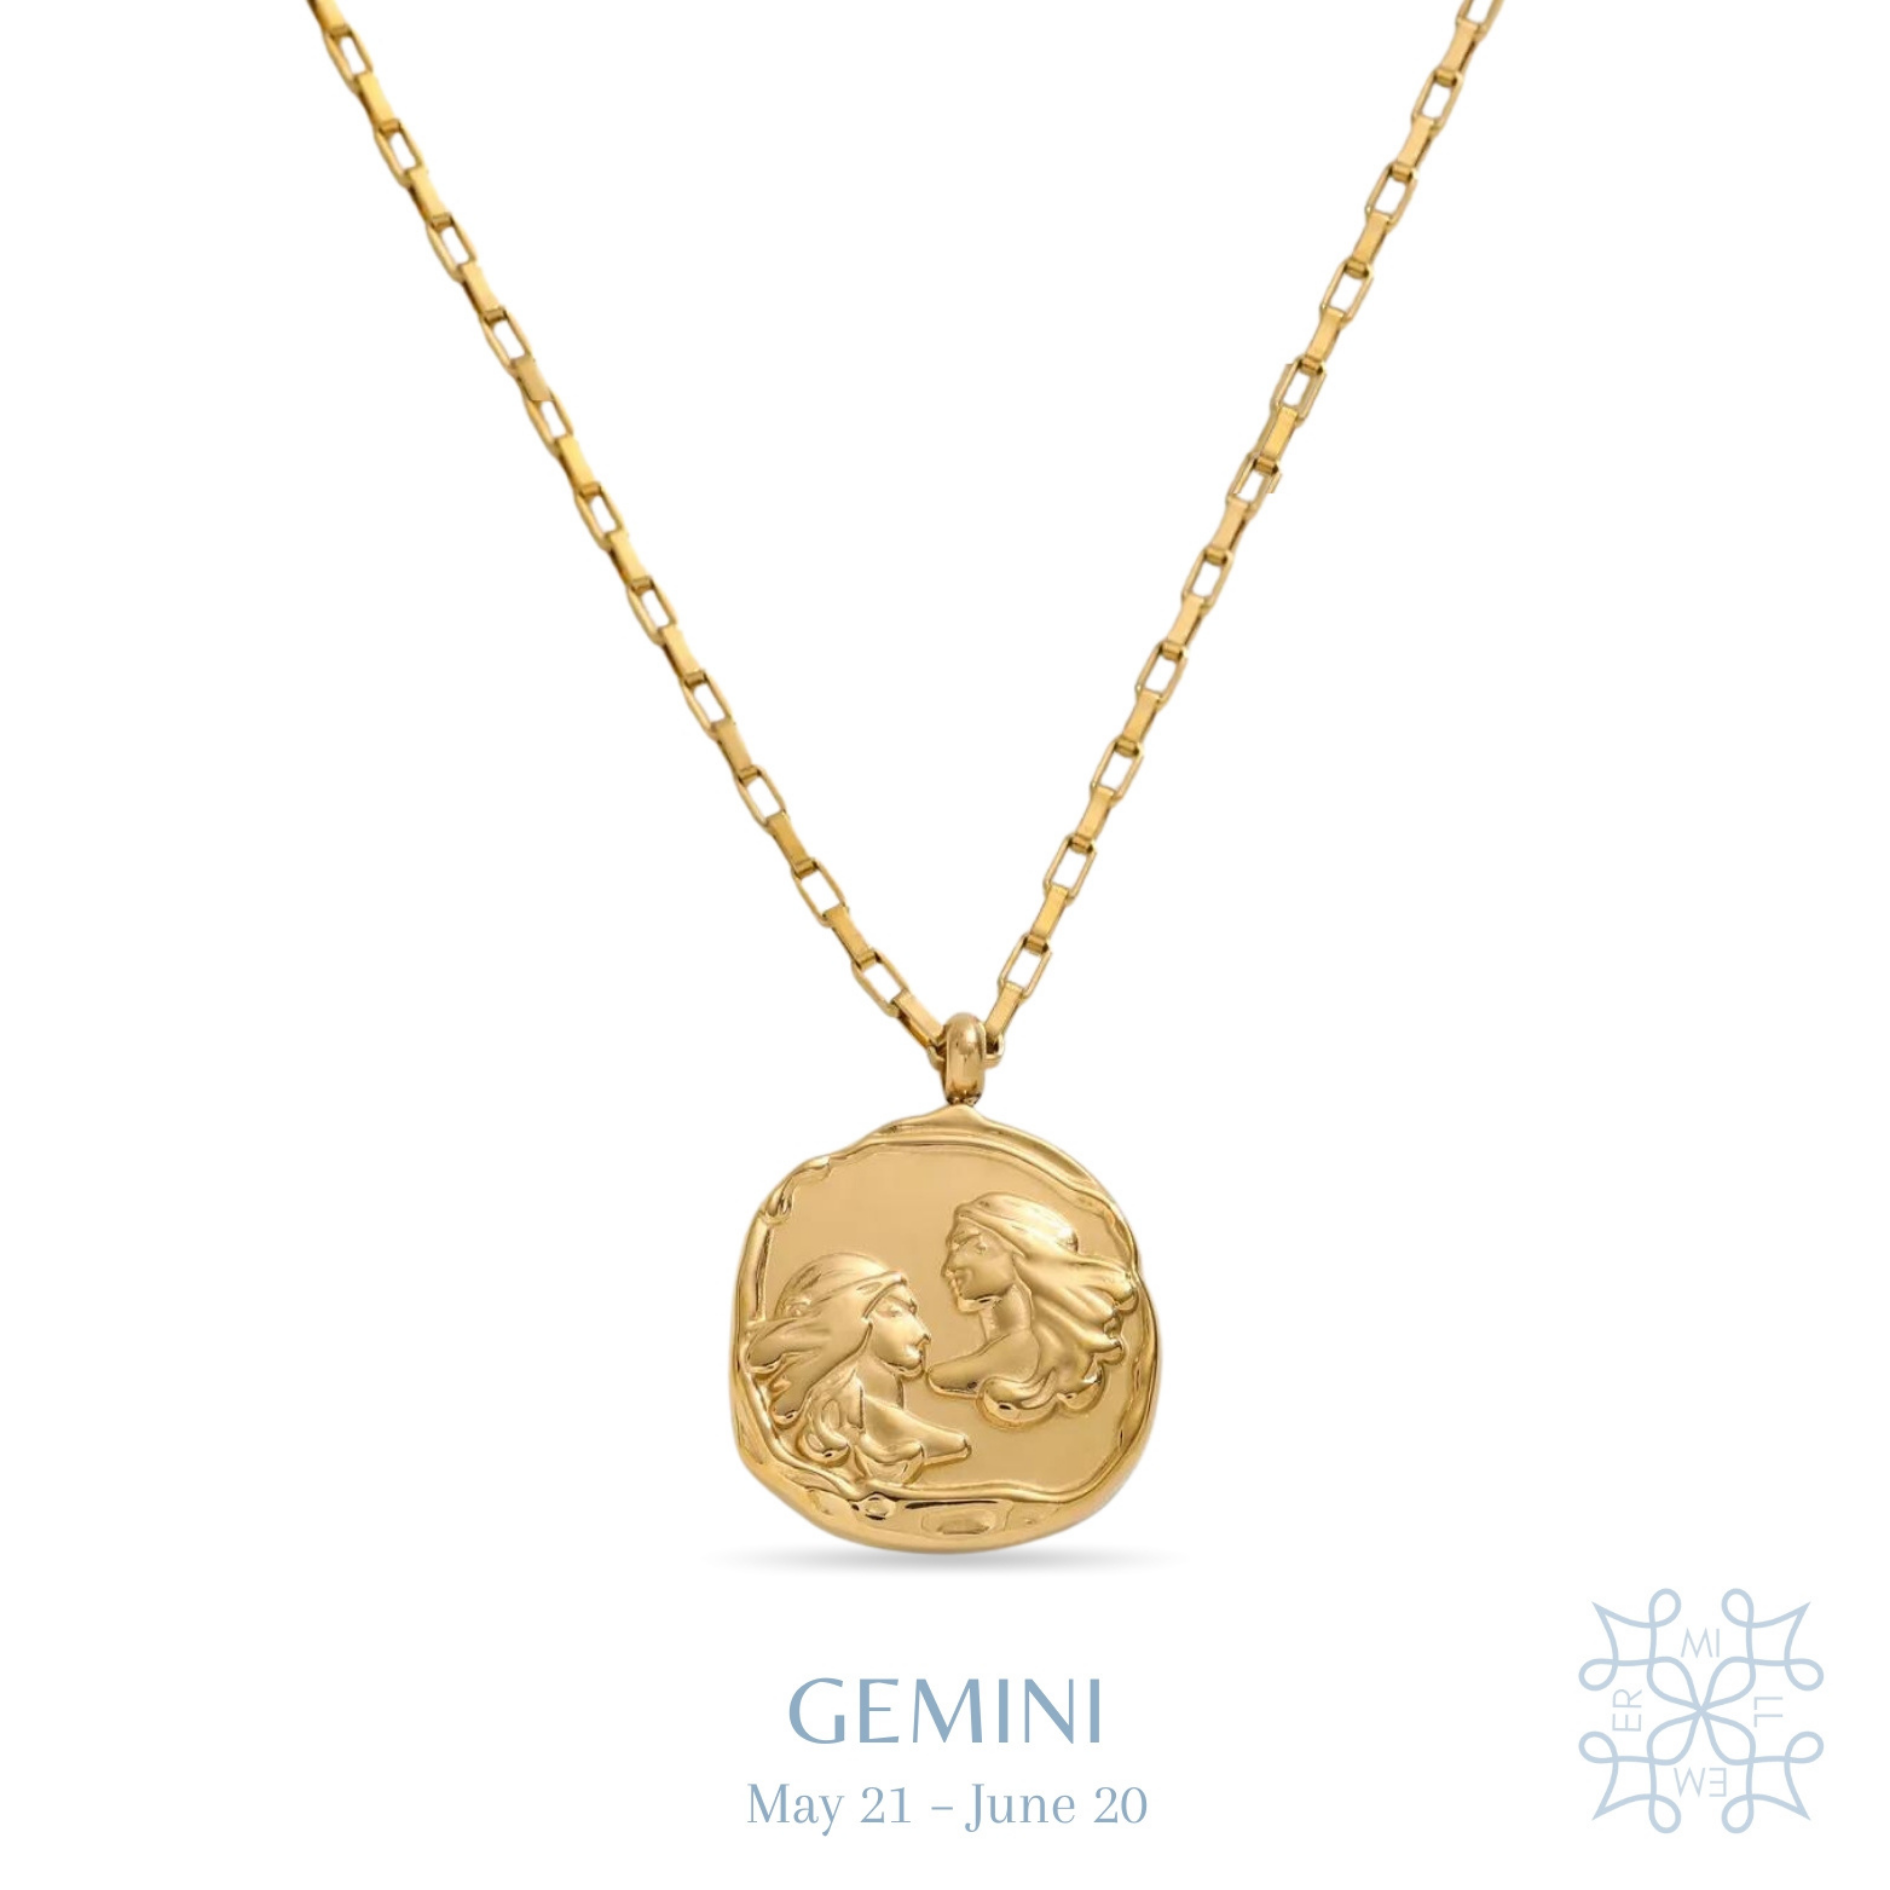 Gemini Zodiac Medallion Gold Necklace - Gold plated medallion irregular shape with two people representin the twins - geminis on it.  Gold chain necklace.